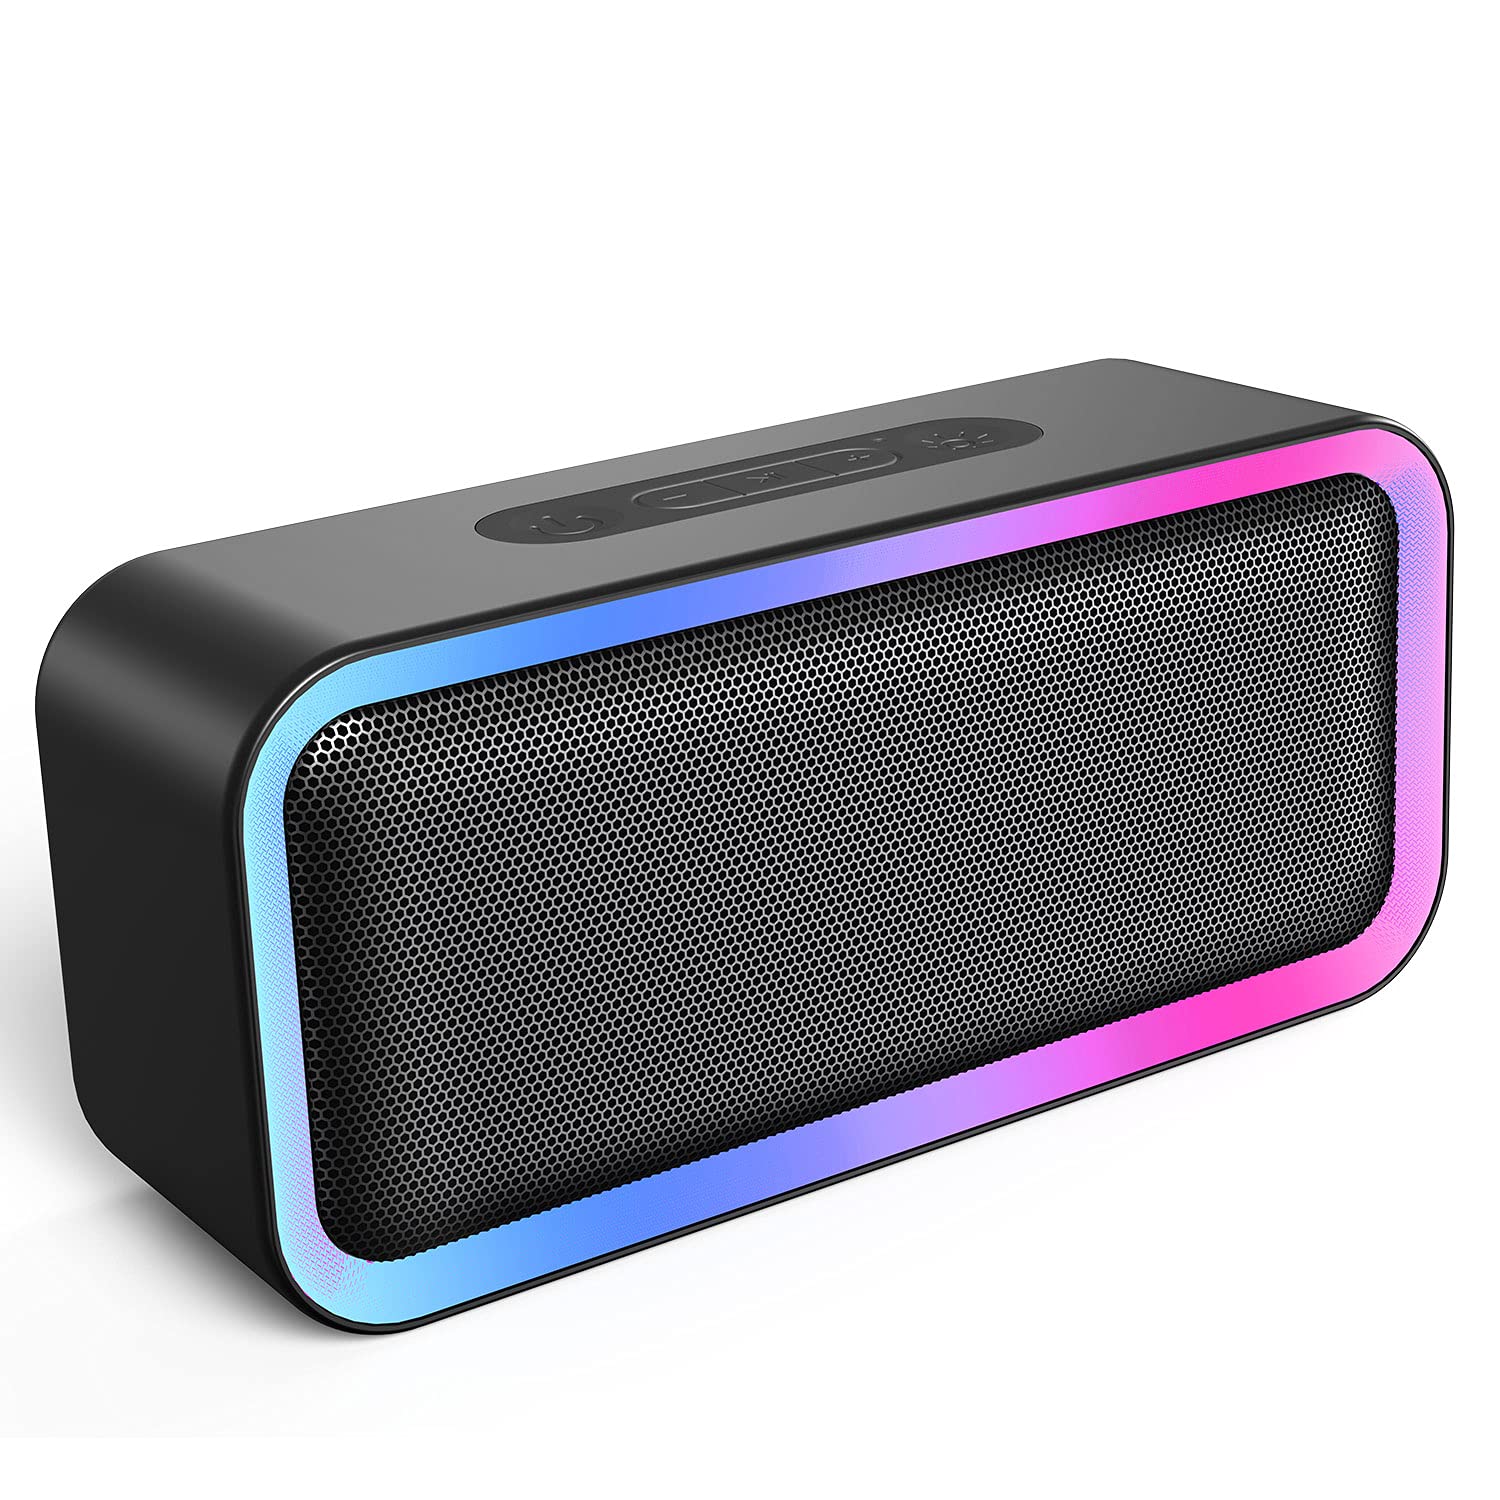 Kunodi Bluetooth Speaker, Bluetooth 5.0 Wireless Portable Speaker with 10W Stereo Sound, Party Speakers with Ambient RGB Light,18-Hour Playtime,IPX5 Waterproof Speakers for Outdoors, Travel（Black